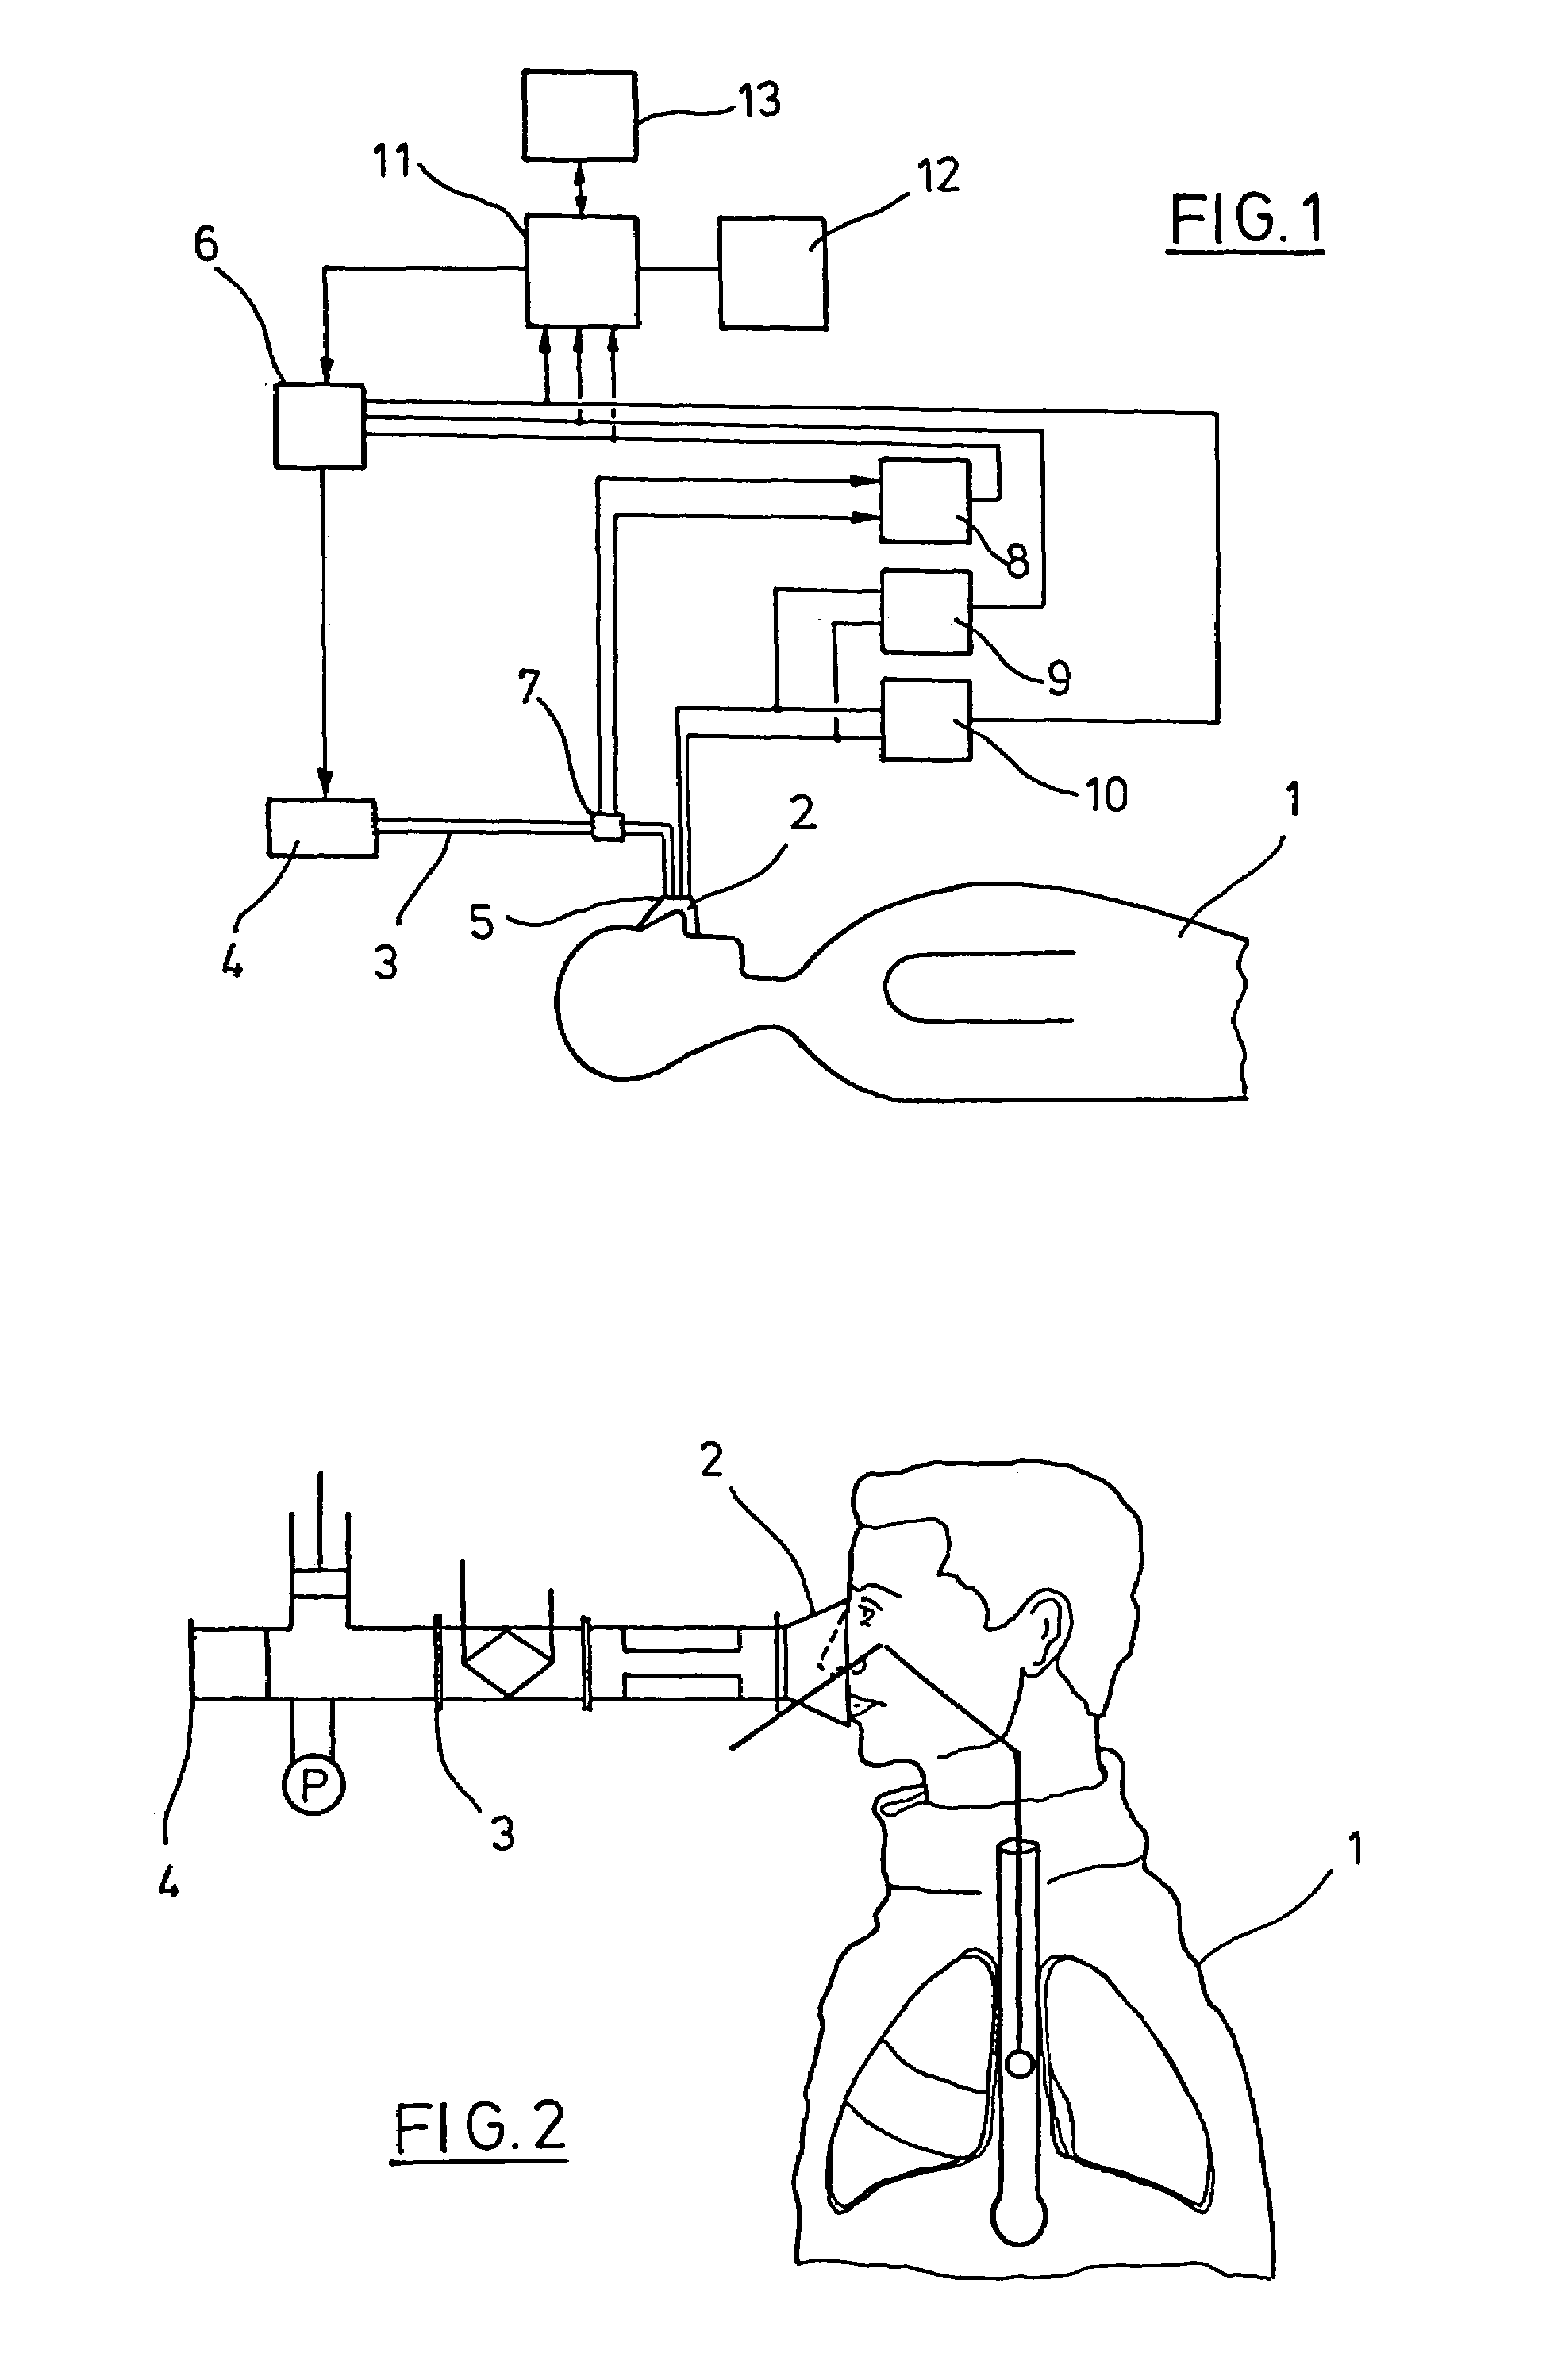 Procedure for the control of a respirator device as well as apparatus for monitoring